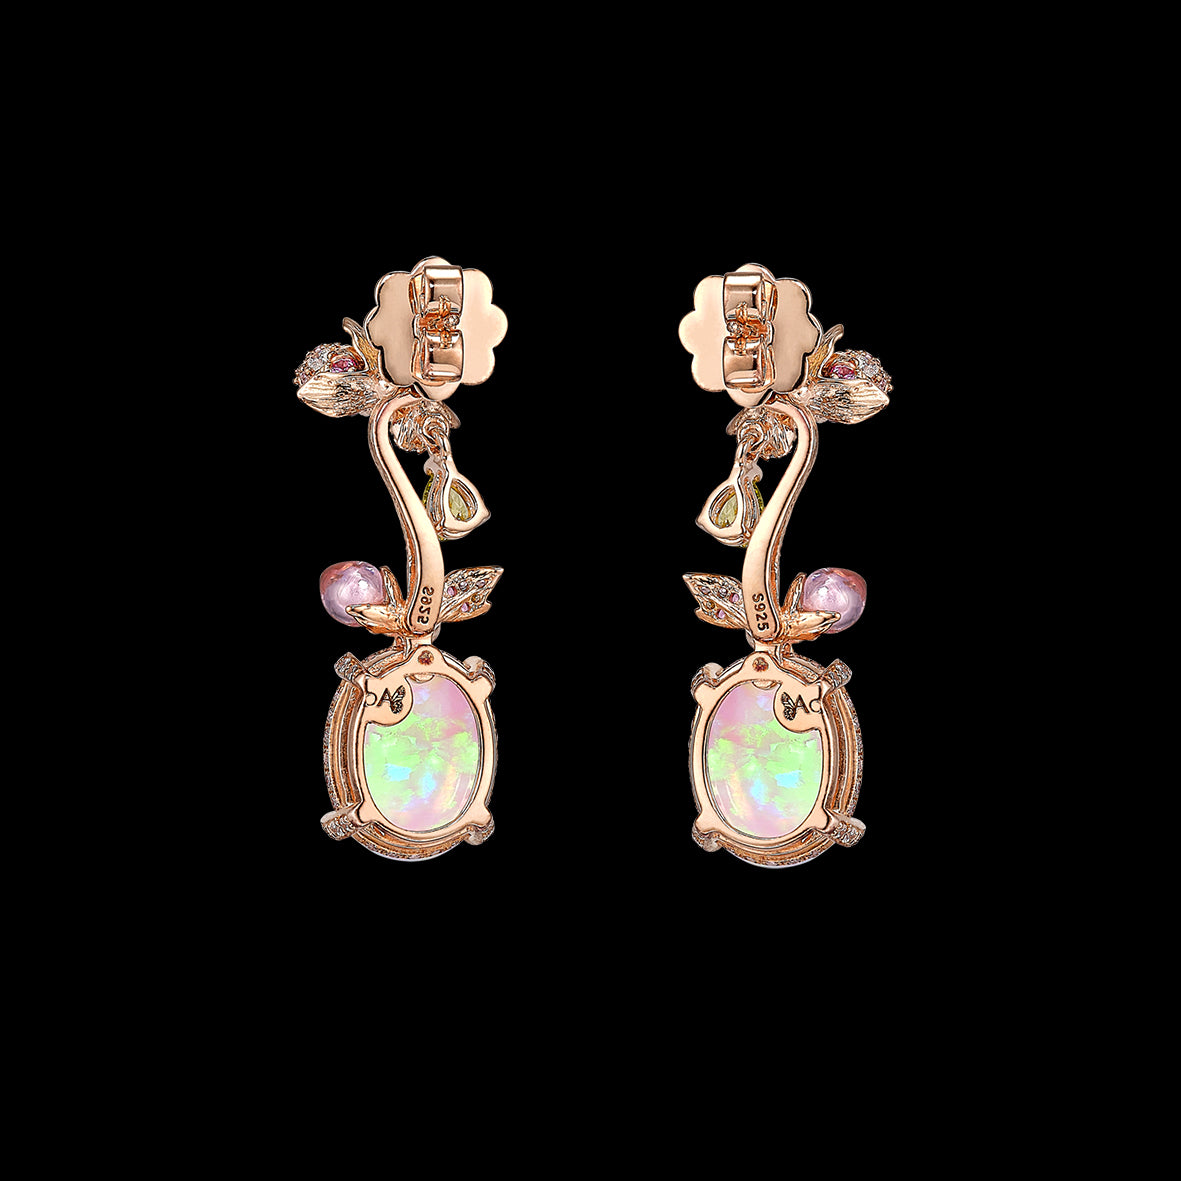 Blush Opal Carnivora Earrings, Earrings, Anabela Chan Joaillerie - Fine jewelry with laboratory grown and created gemstones hand-crafted in the United Kingdom. Anabela Chan Joaillerie is the first fine jewellery brand in the world to champion laboratory-grown and created gemstones with high jewellery design, artisanal craftsmanship and a focus on ethical and sustainable innovations.